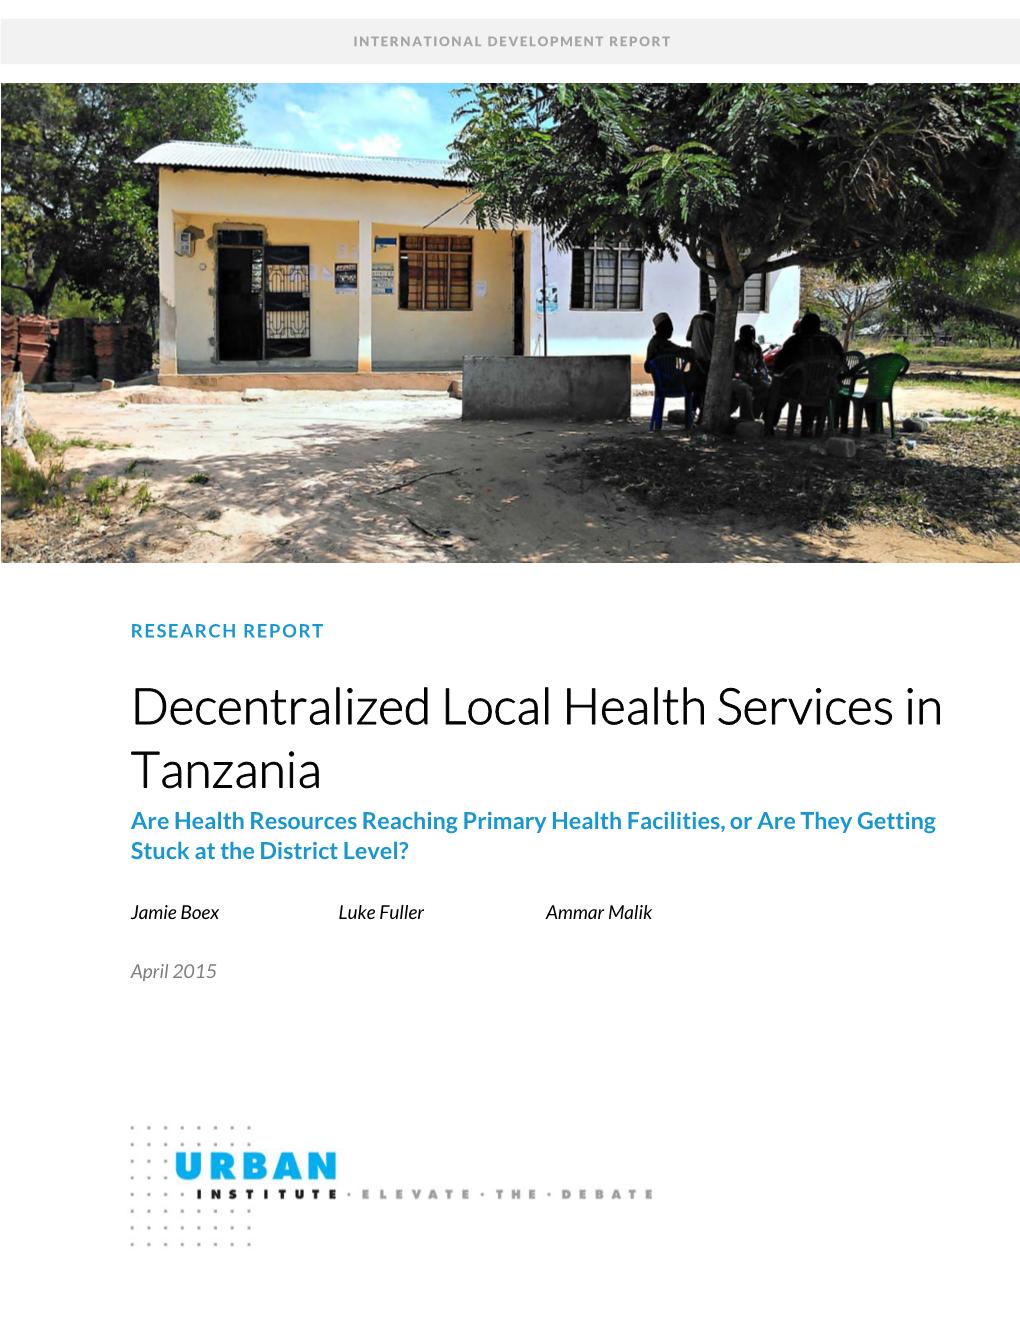 Decentralized Local Health Services in Tanzania Are Health Resources Reaching Primary Health Facilities, Or Are They Getting Stuck at the District Level?